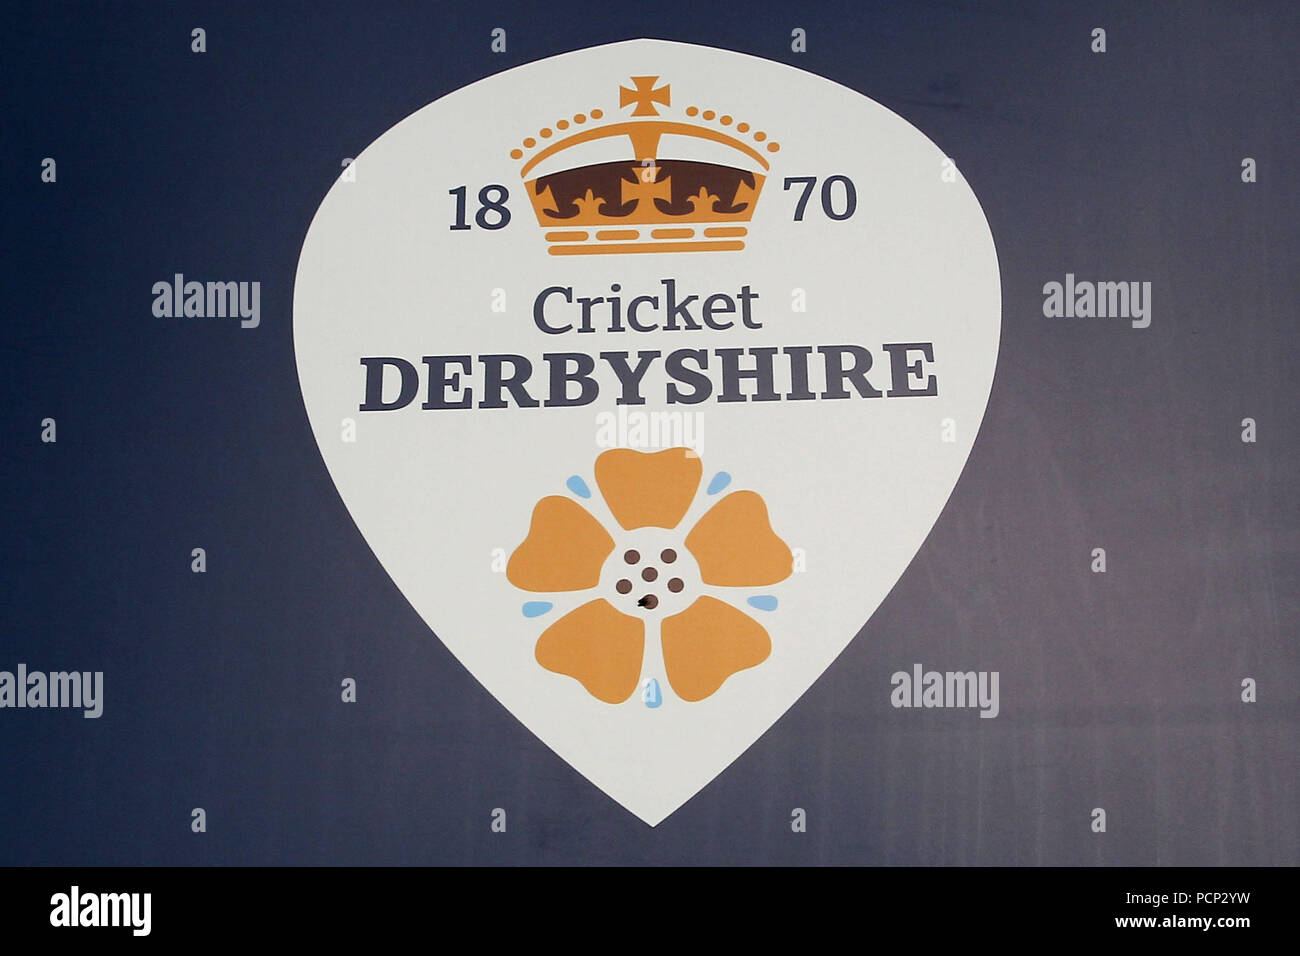 The Derbyshire County Cricket Club sign ahead of Derbyshire CCC vs Essex CCC, Specsavers County Championship Division 2 Cricket at the 3aaa County Cri Stock Photo